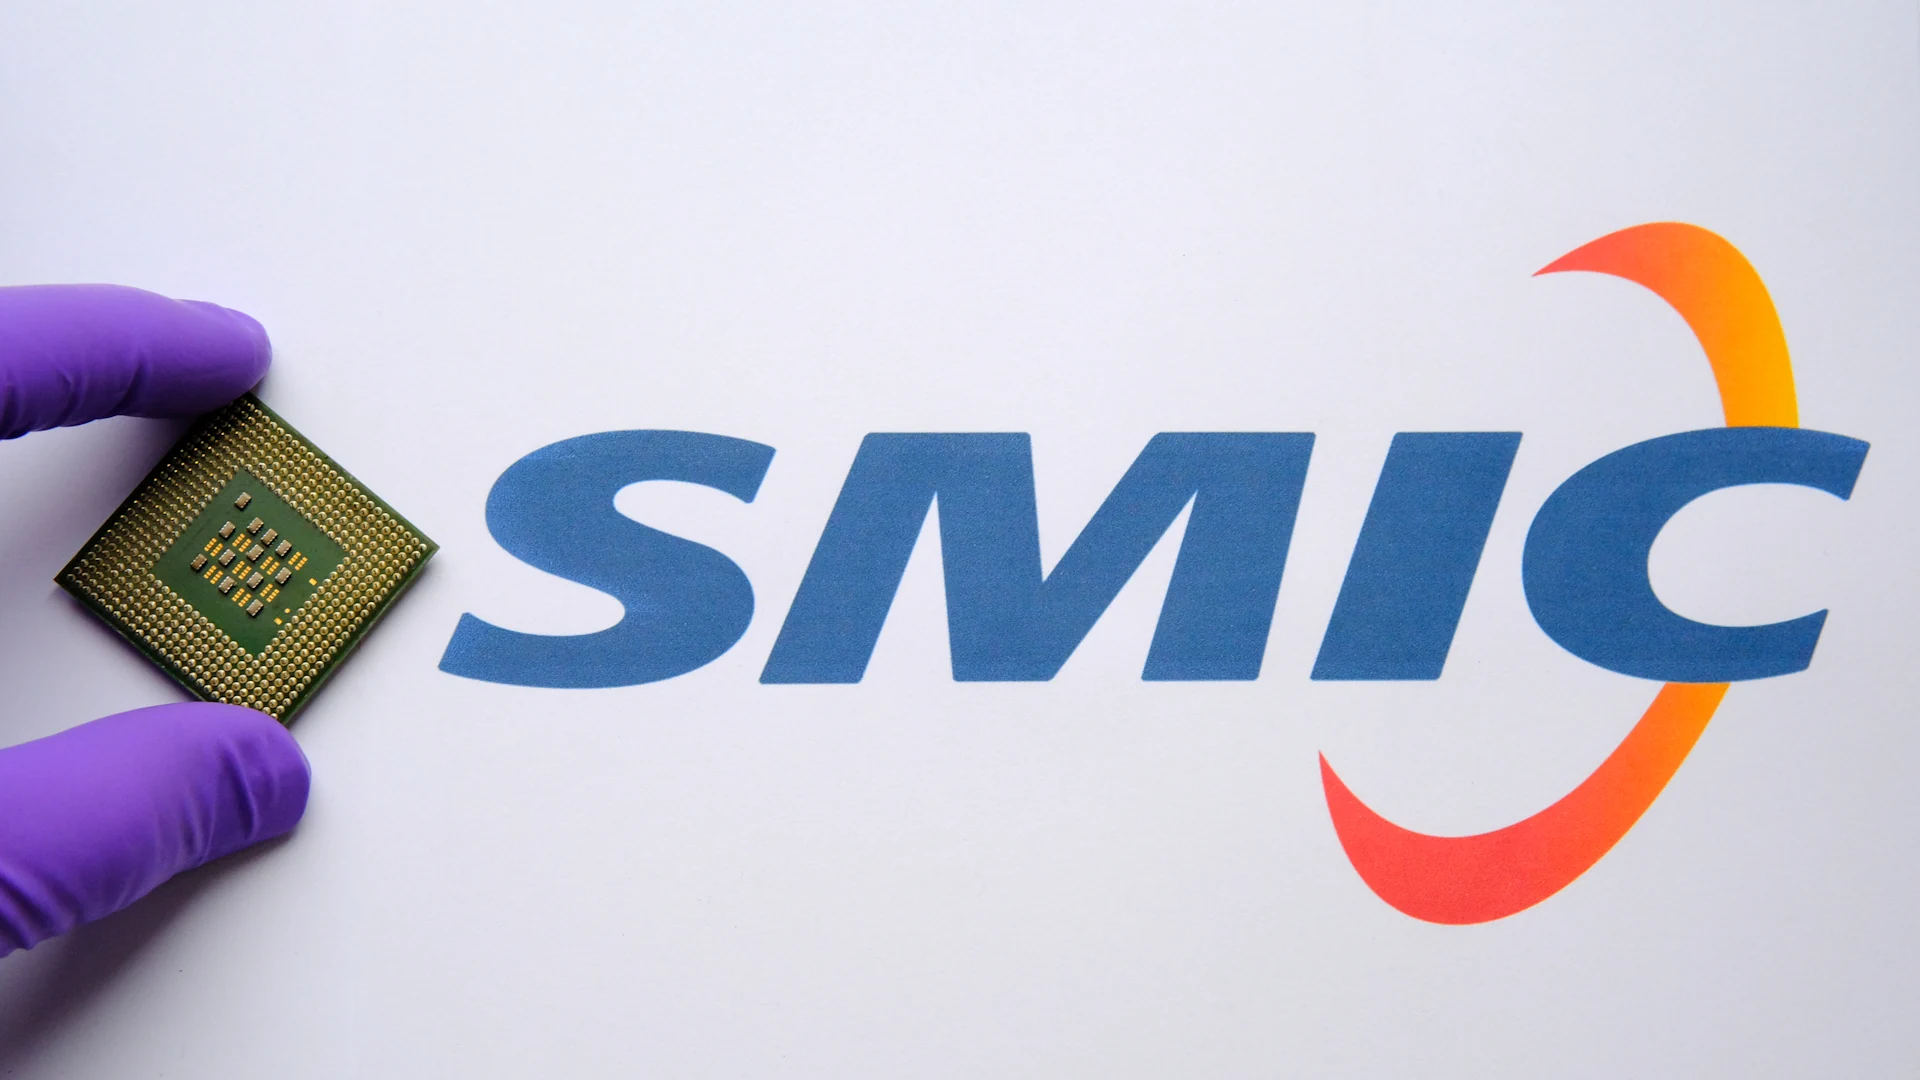 Media: SMIC is actively working on 3nm chips despite US sanctions restricting it